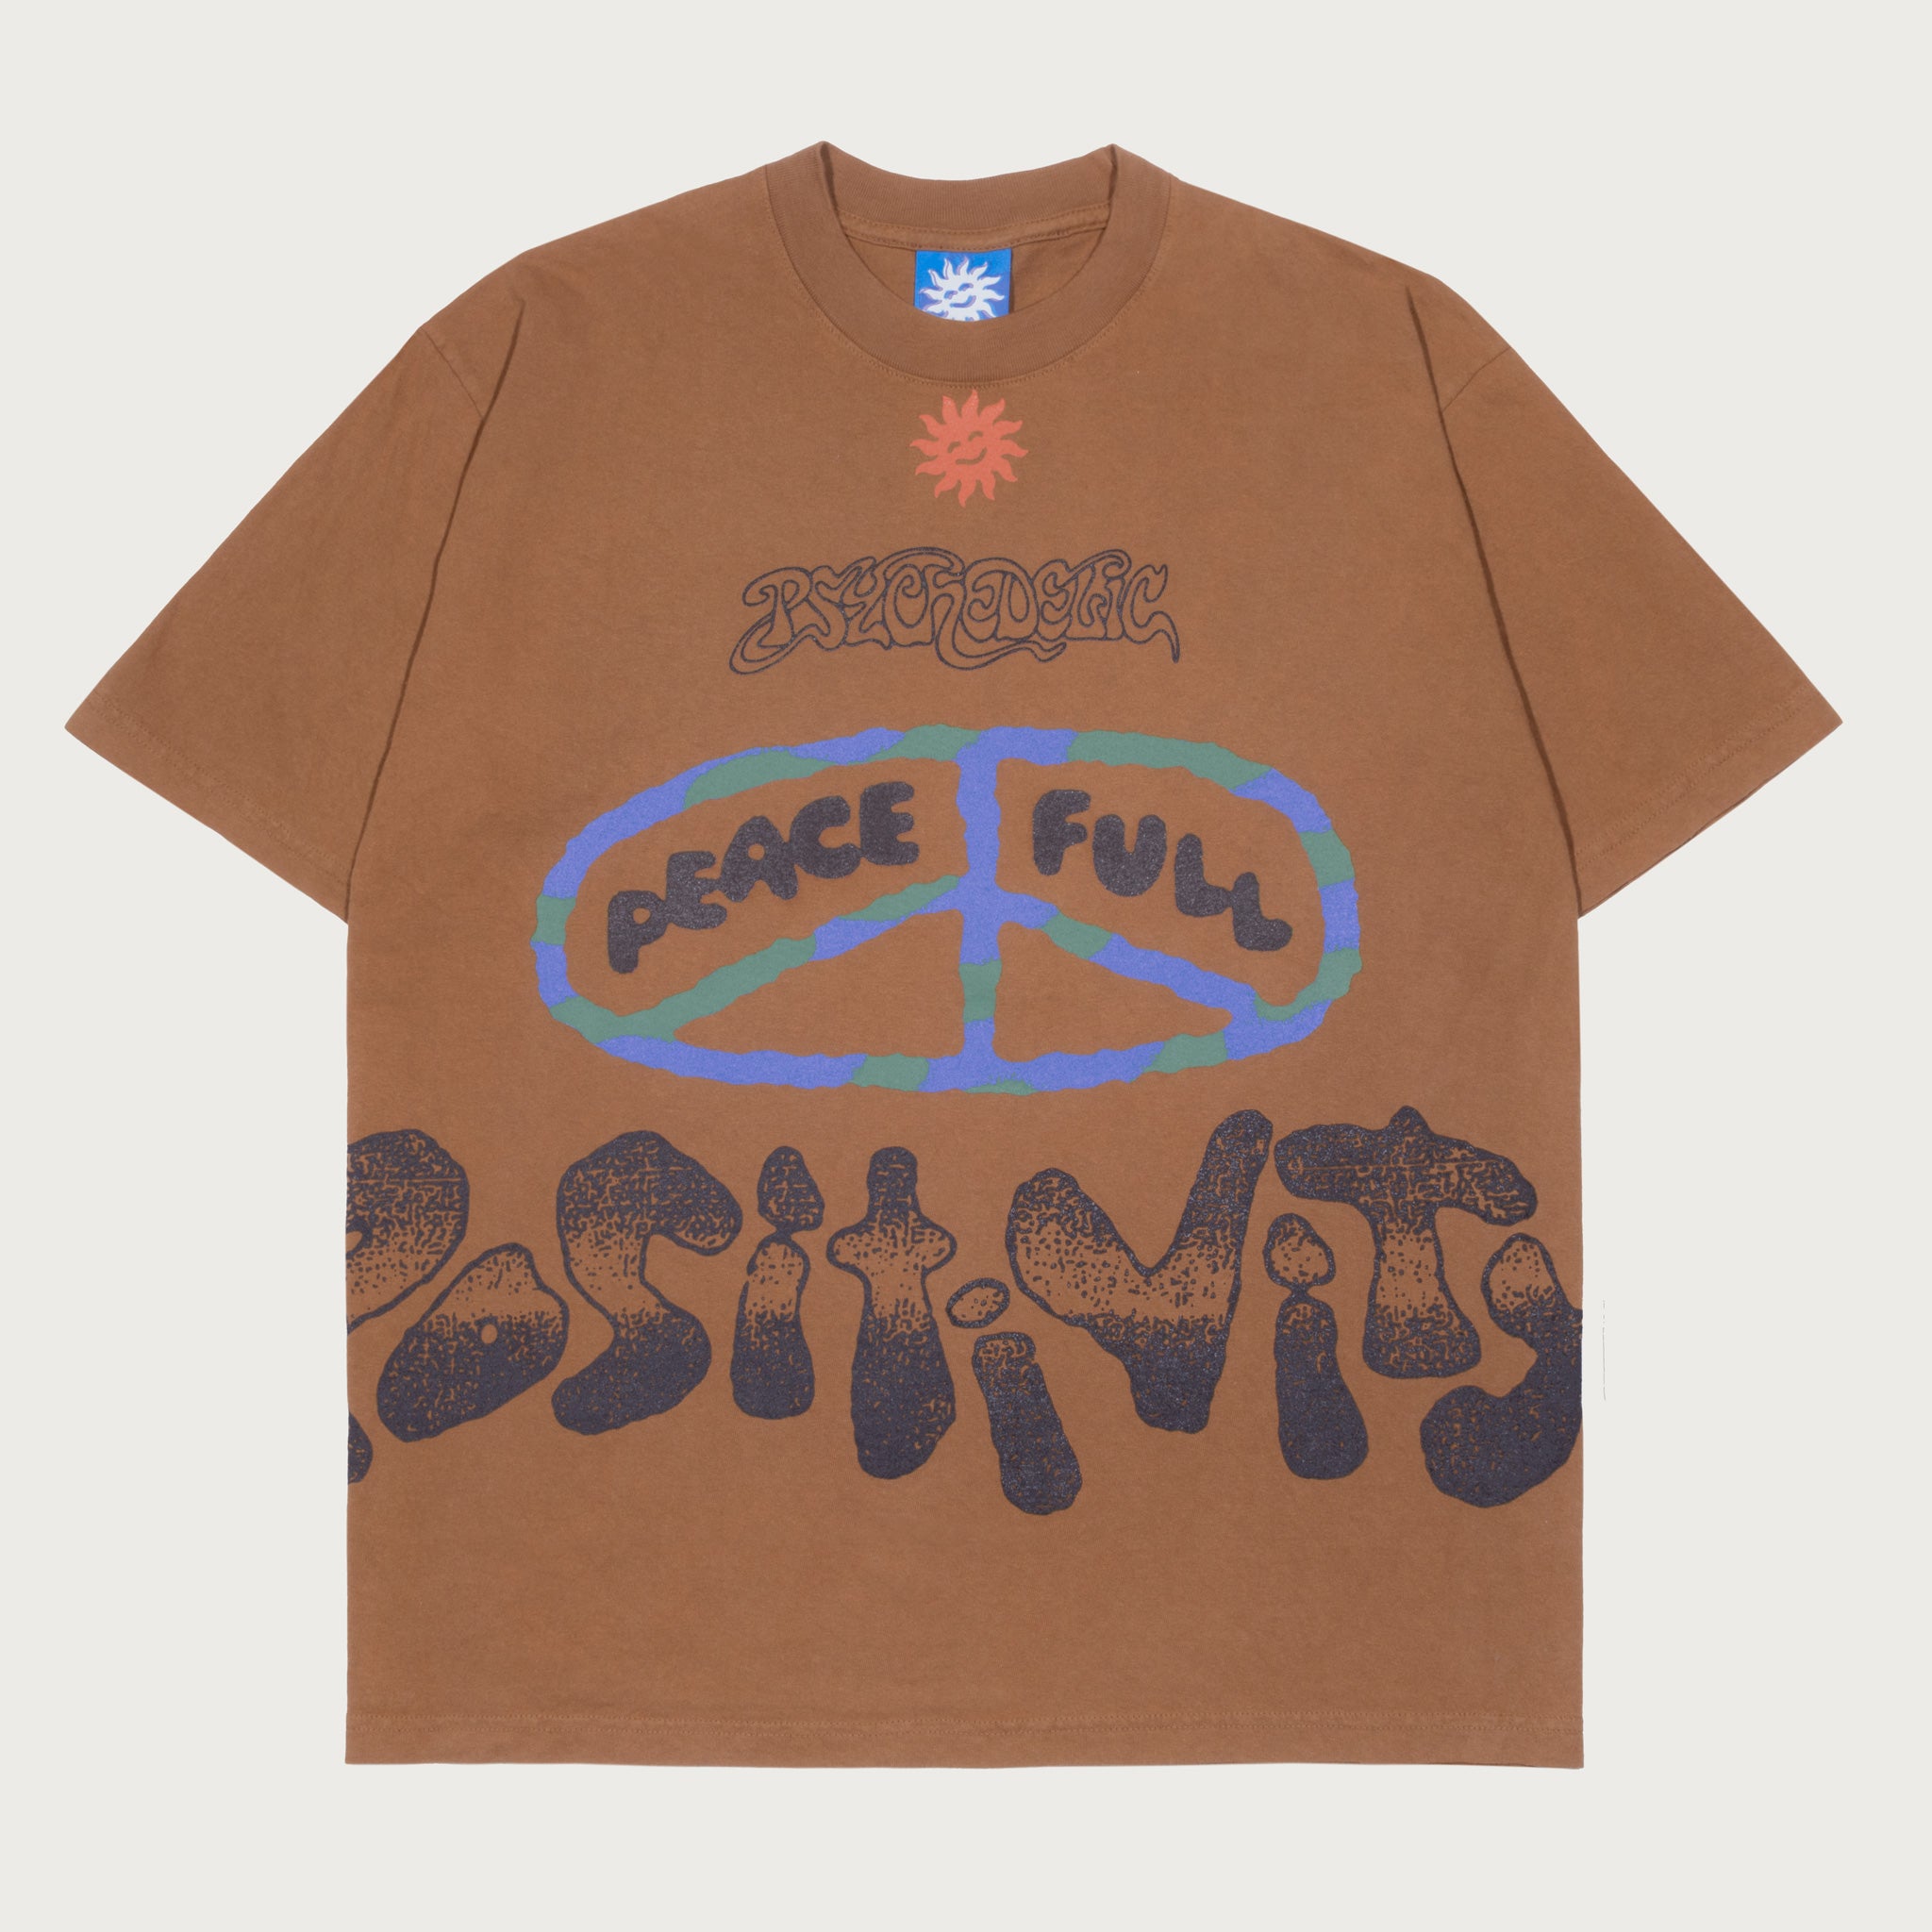 PSYCHEDELIC PEACEFUL POSITIVITY tee - brown